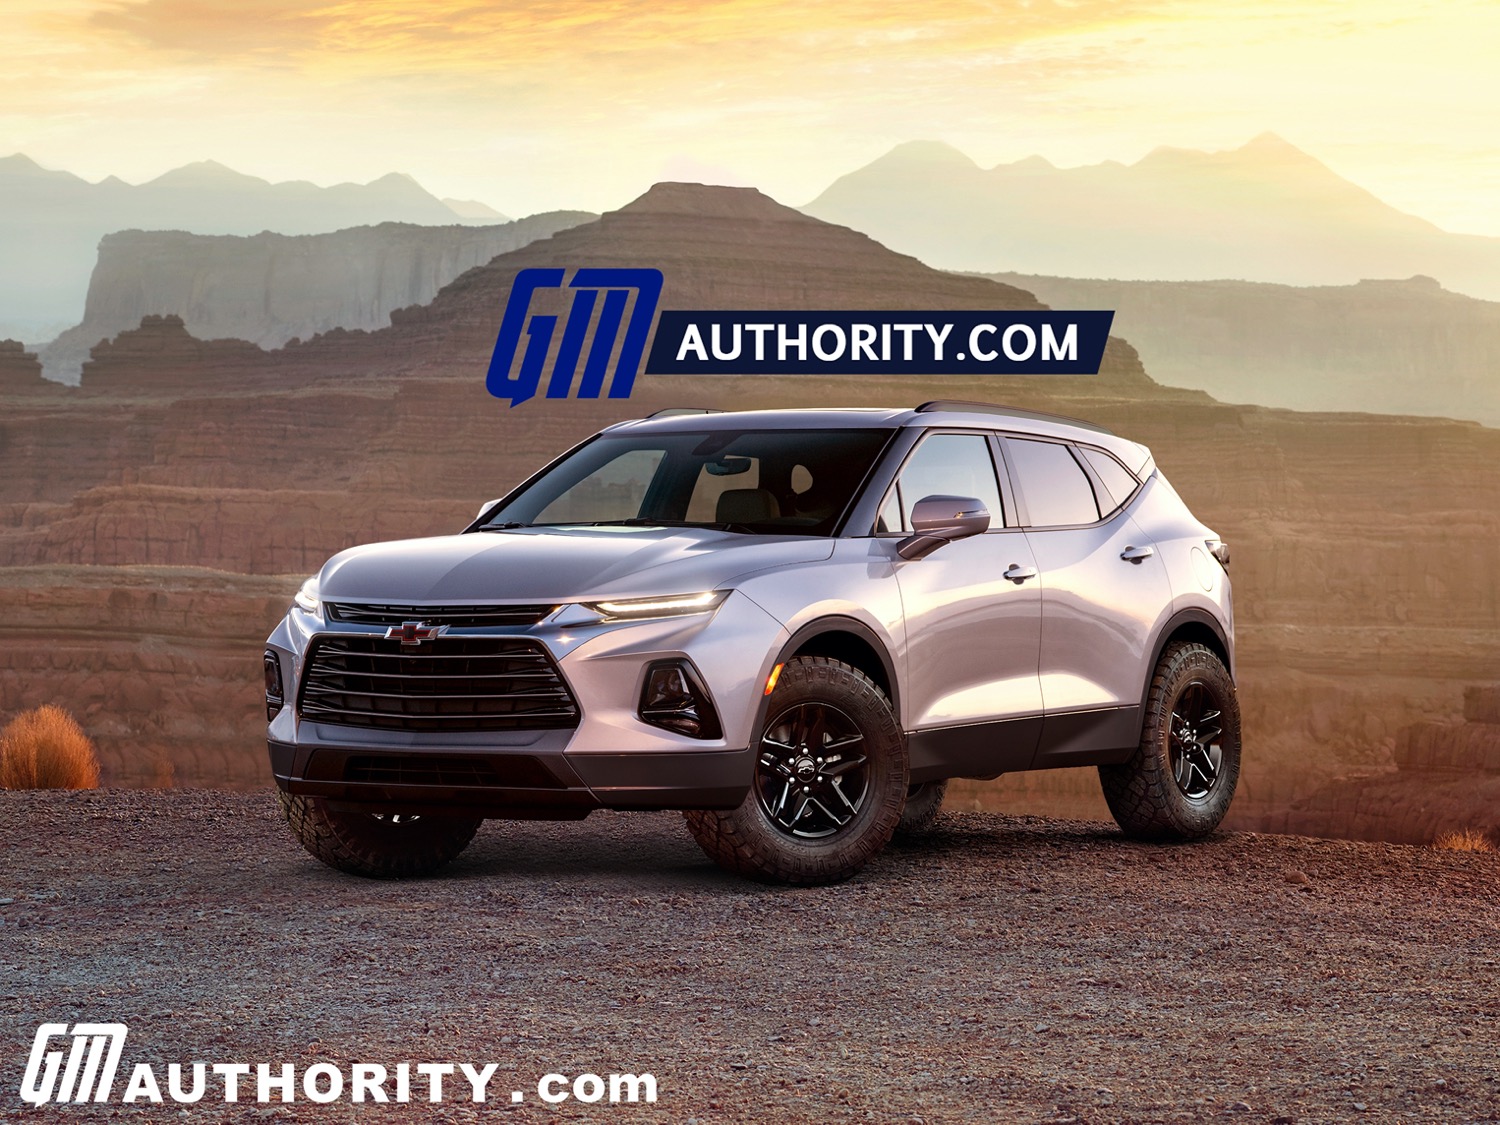 Chevy Blazer Activ Rendering Brings OffRoading Upgrades GM Authority